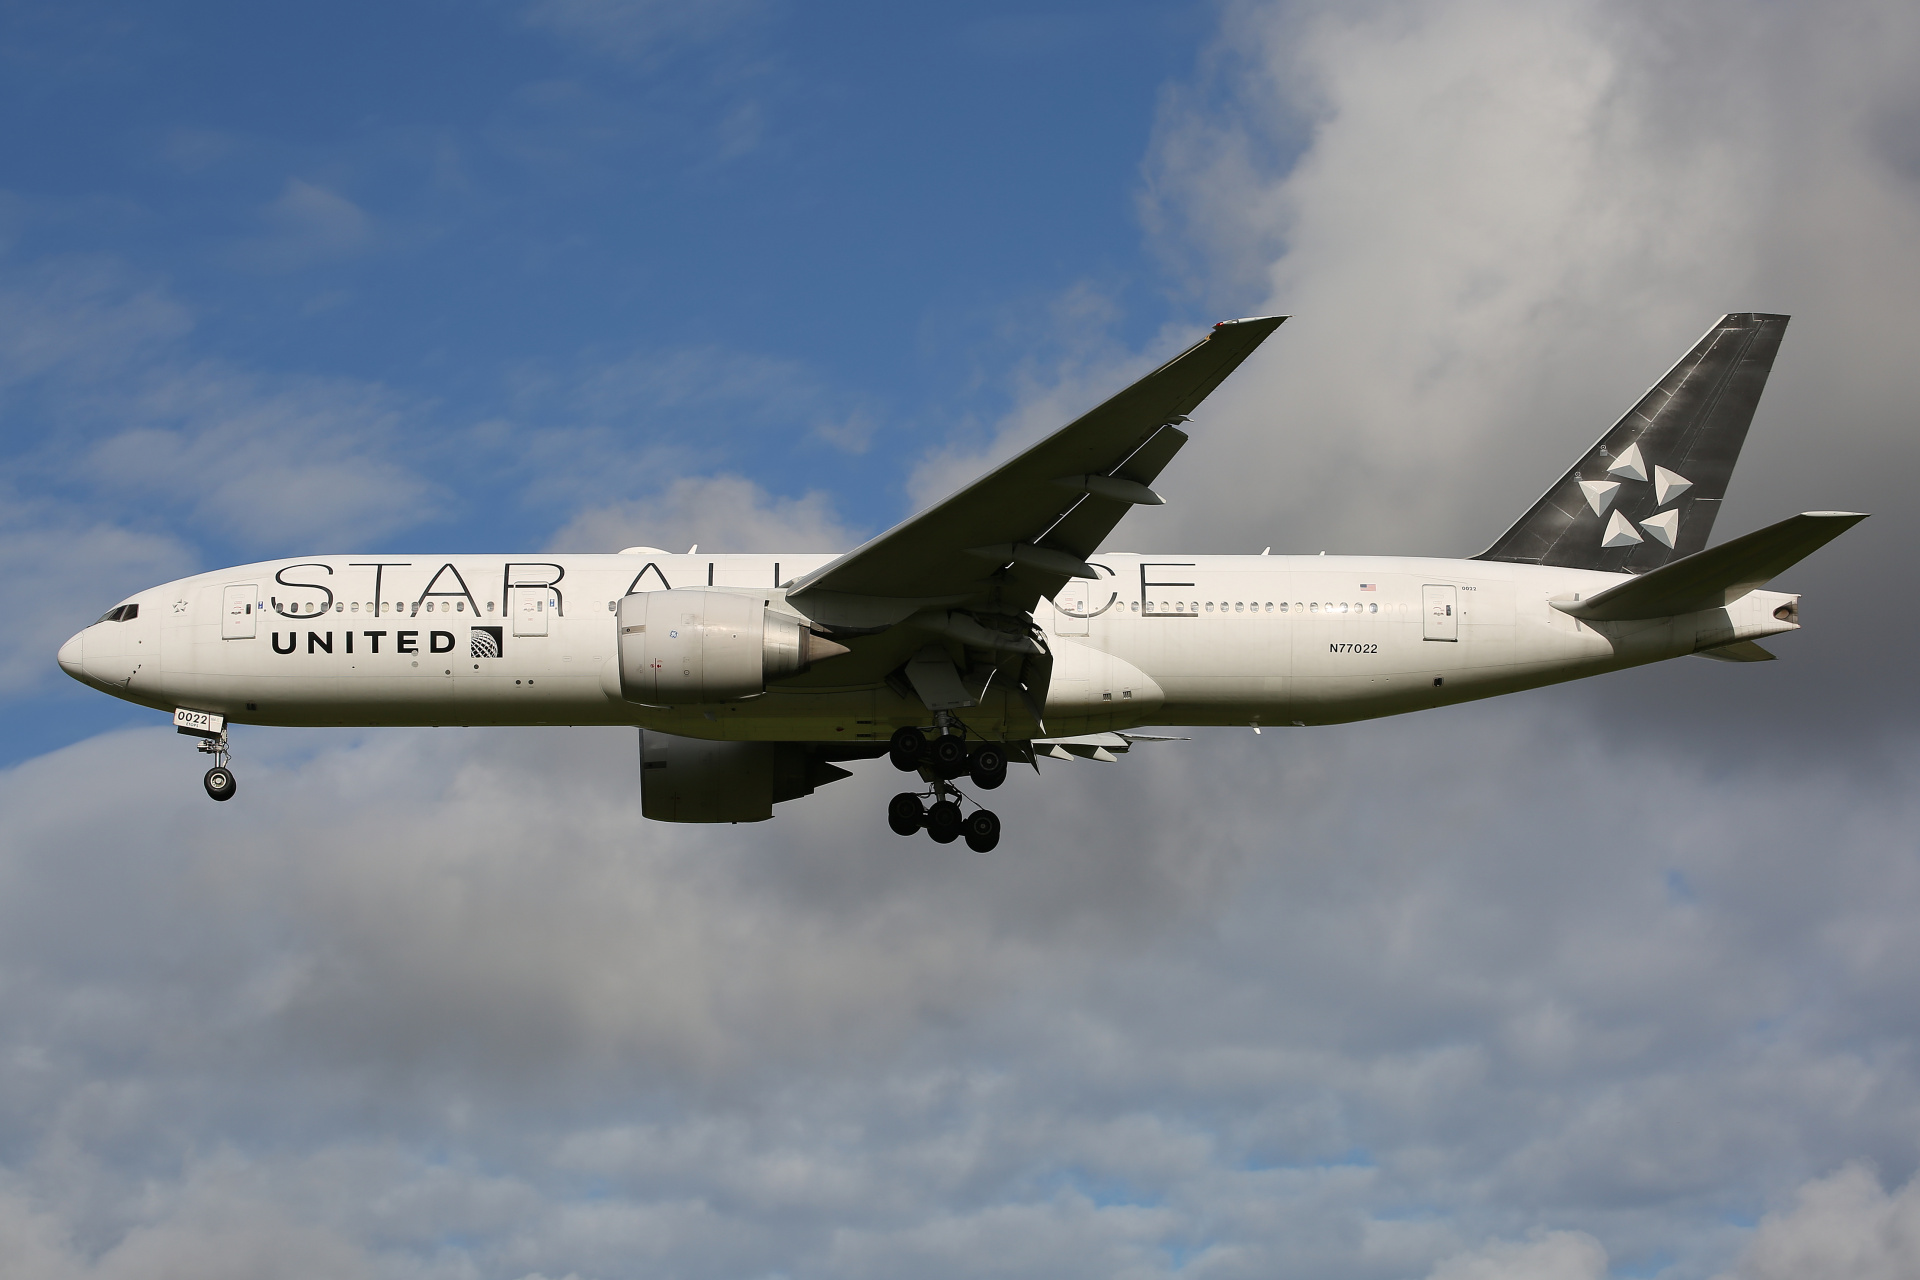 N77022 (Star Alliance livery) (Aircraft » Schiphol Spotting » Boeing 777-200/-ER » United Airlines)